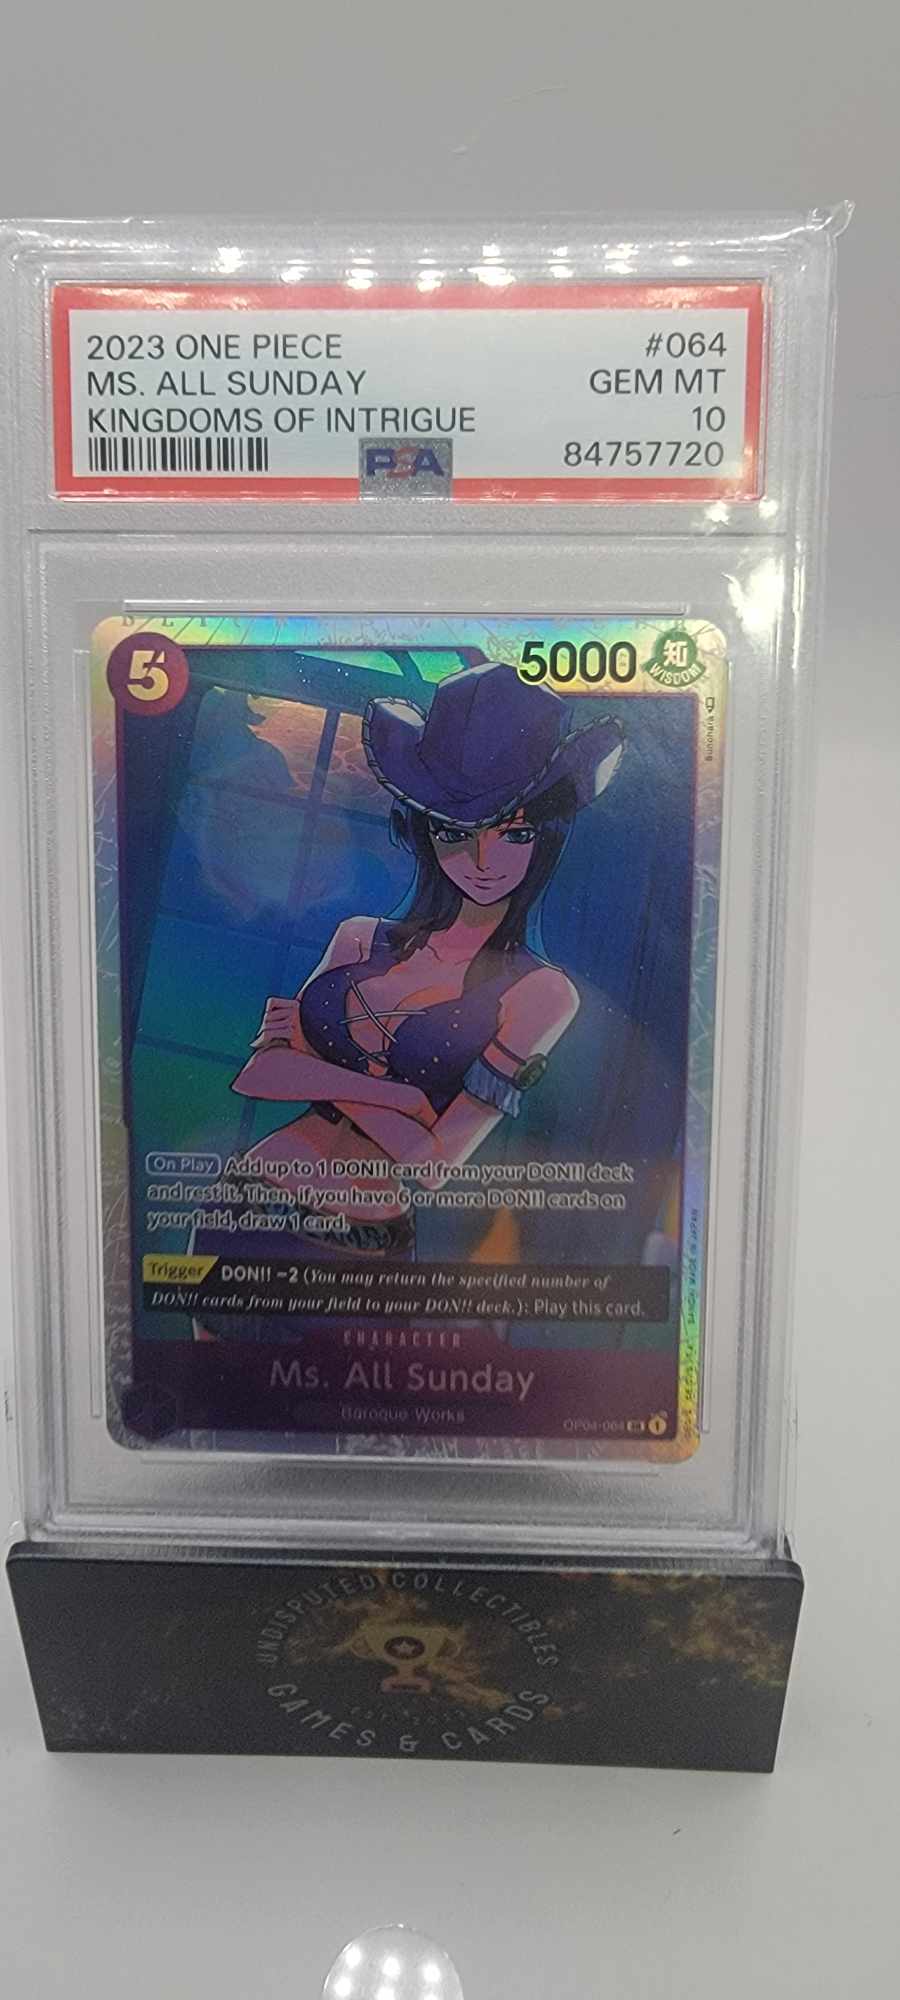 One Piece Kingdoms of Intrigue Ms All Sunday PSA 10